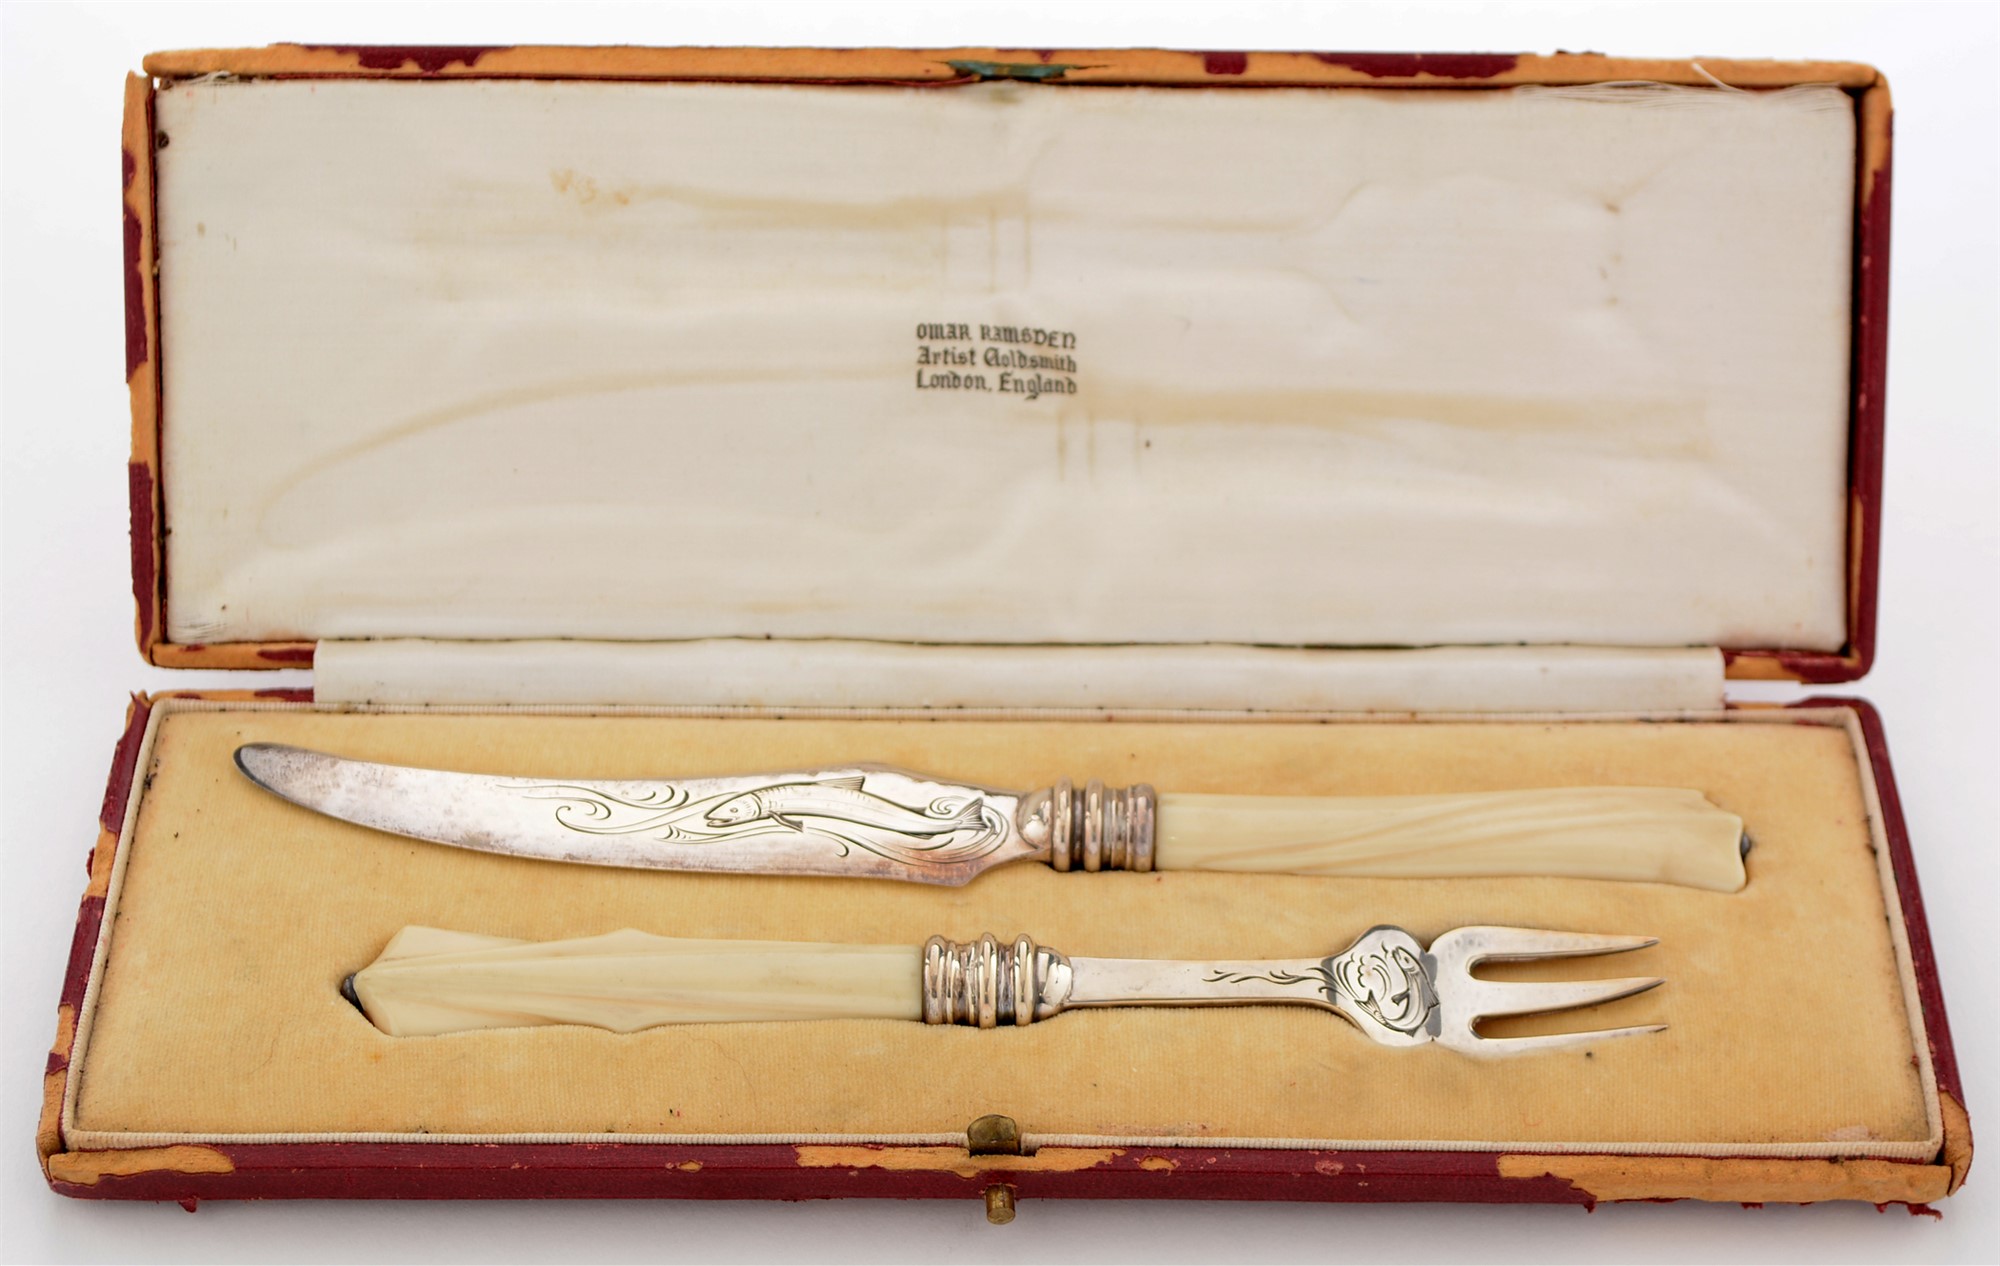 Omar Ramsden silver and ivory fish knife and fork - Image 2 of 2